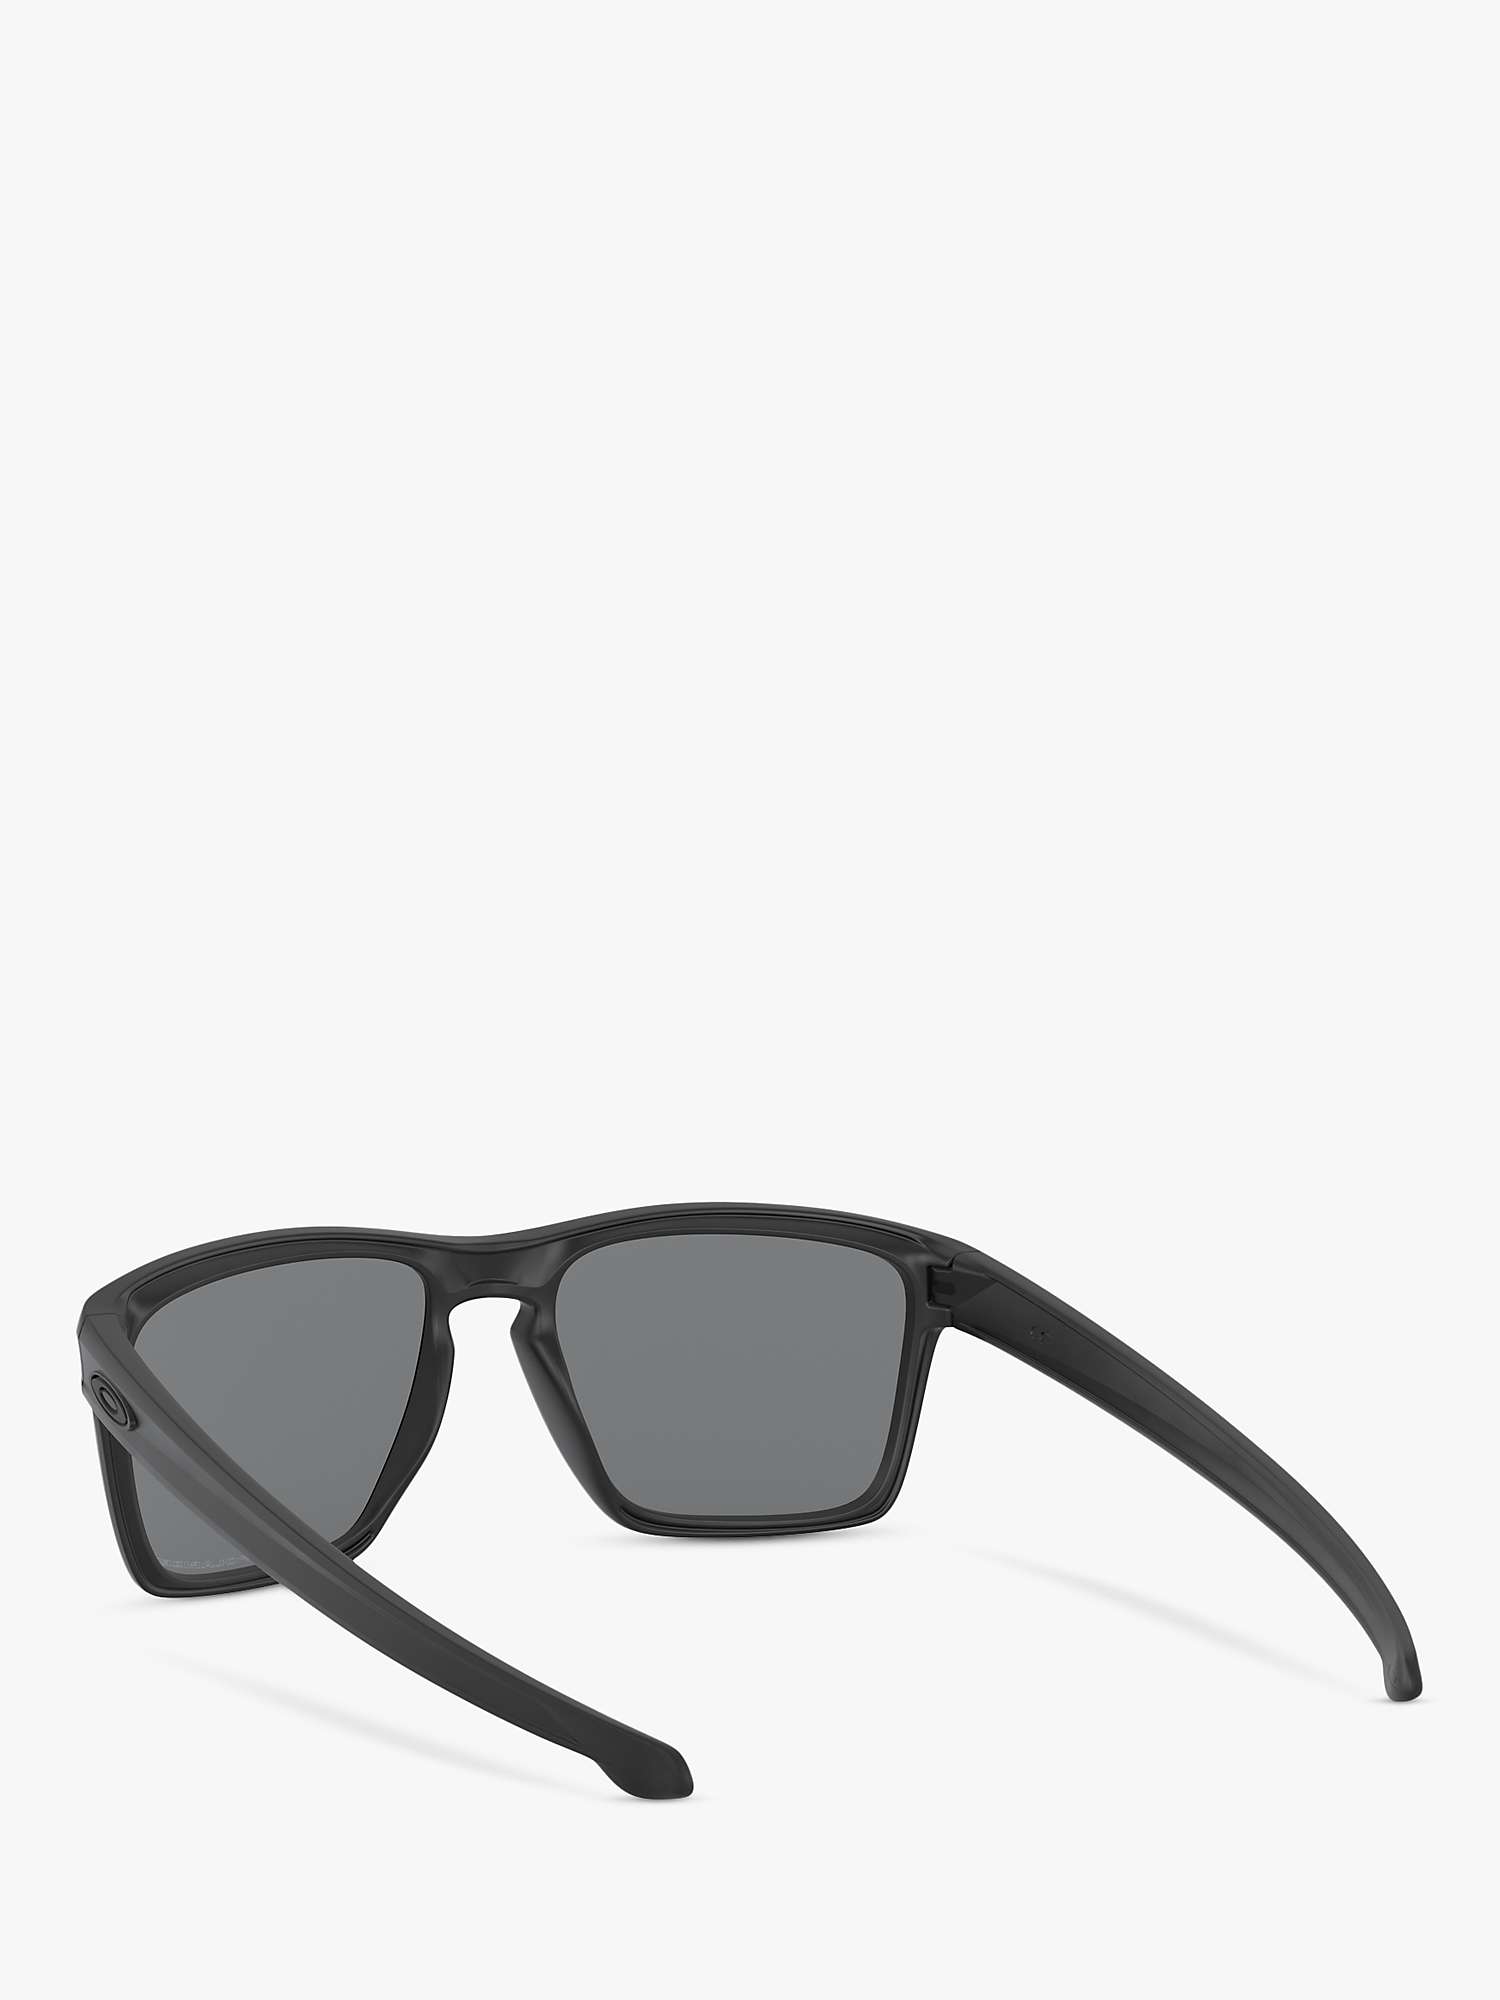 Buy Oakley OO9341 Sliver XL Polarised Square Sunglasses Online at johnlewis.com